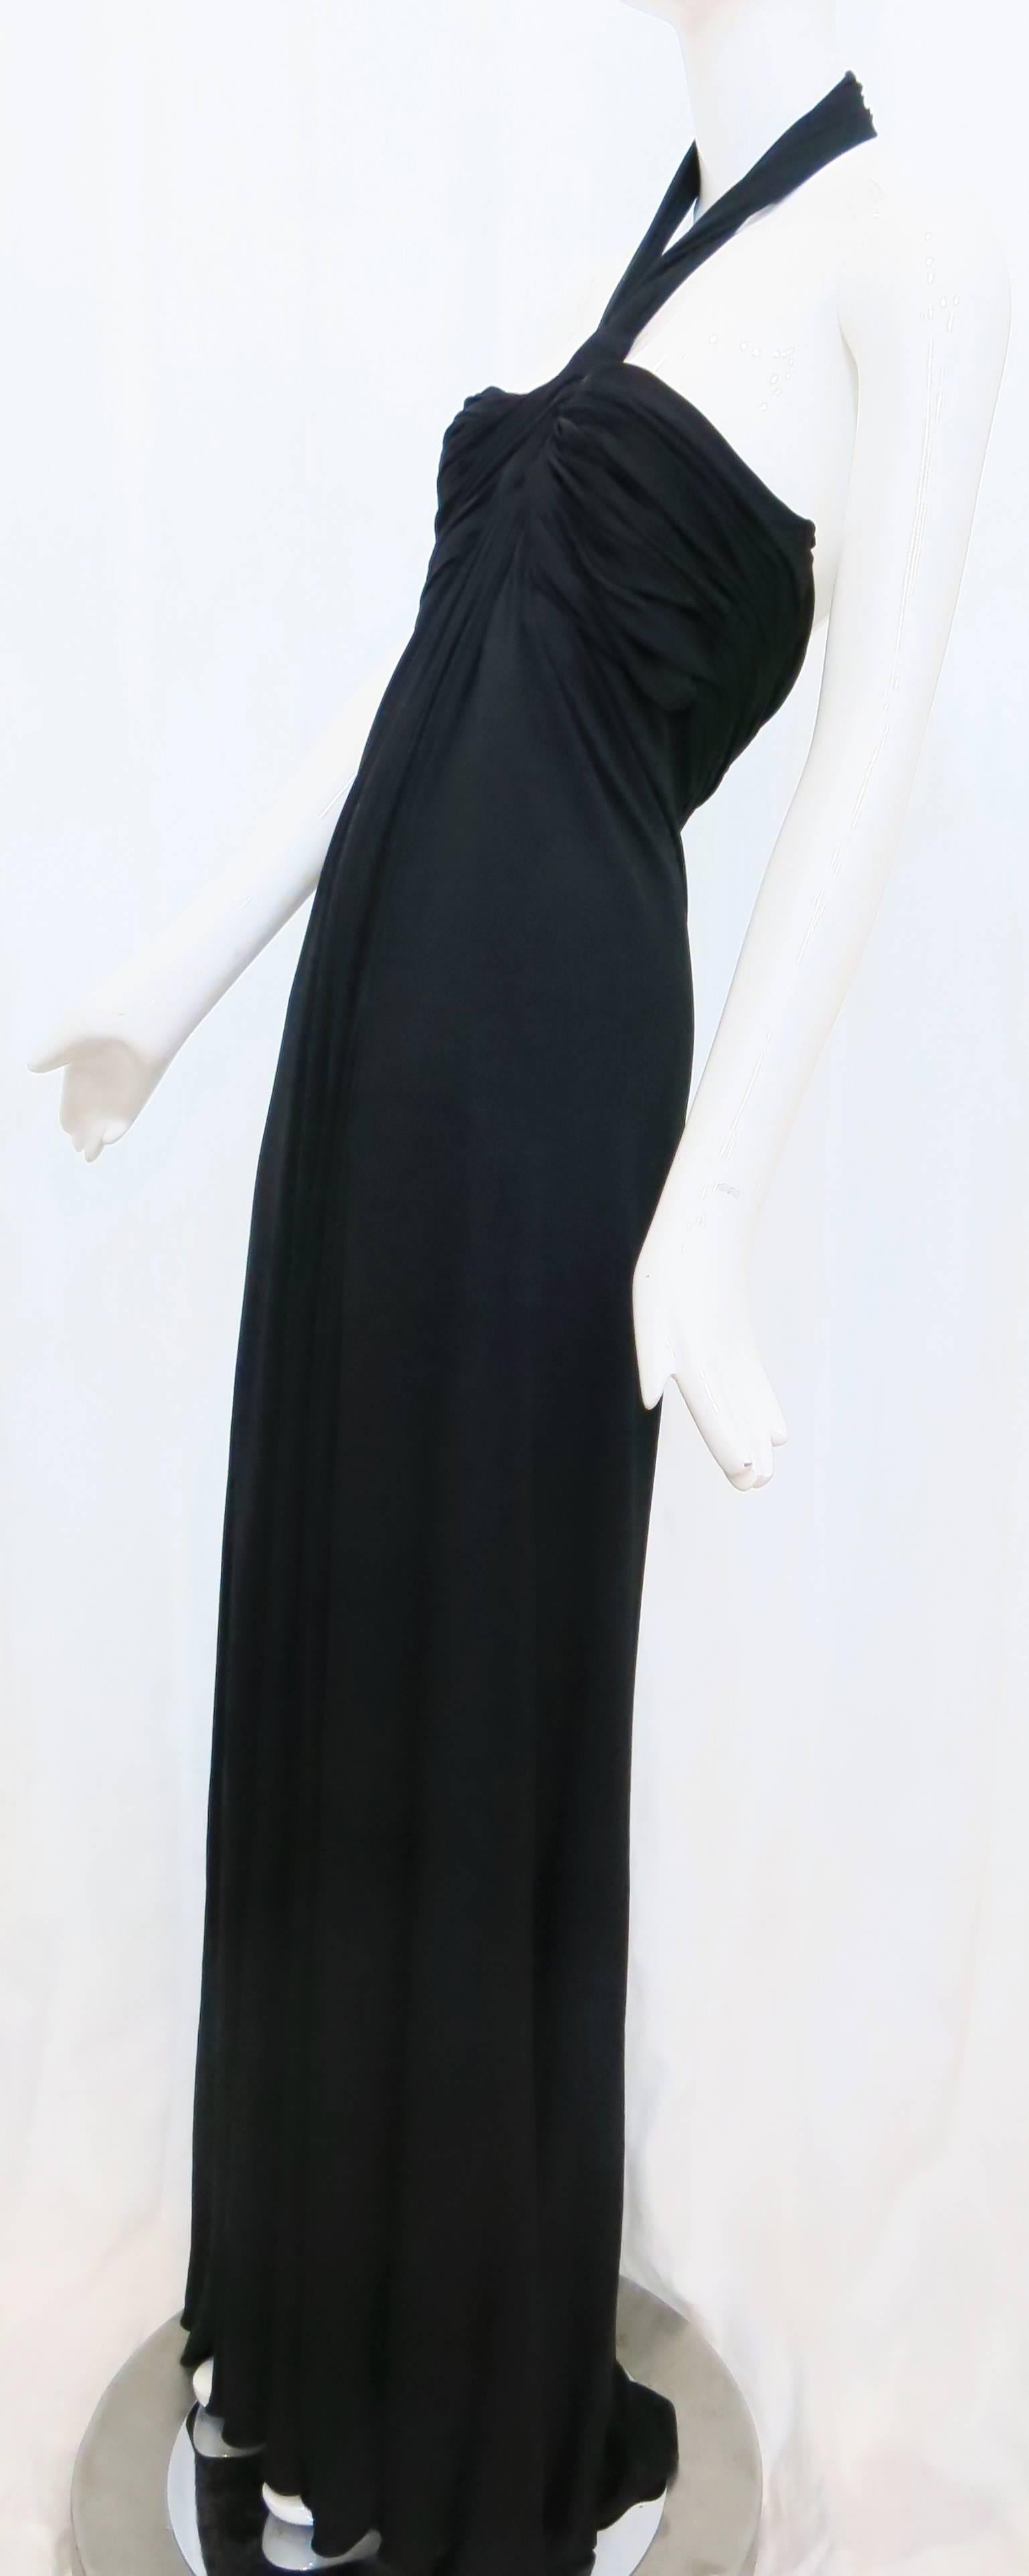 This crêpe Georgette halter gown designed by Bill Tice for Malcolm Starr embodies a classical Grecian influence and the thrill of garments that move with the body in the 1970s. Features an empire waist and a halter that fastens through hook-and-eye